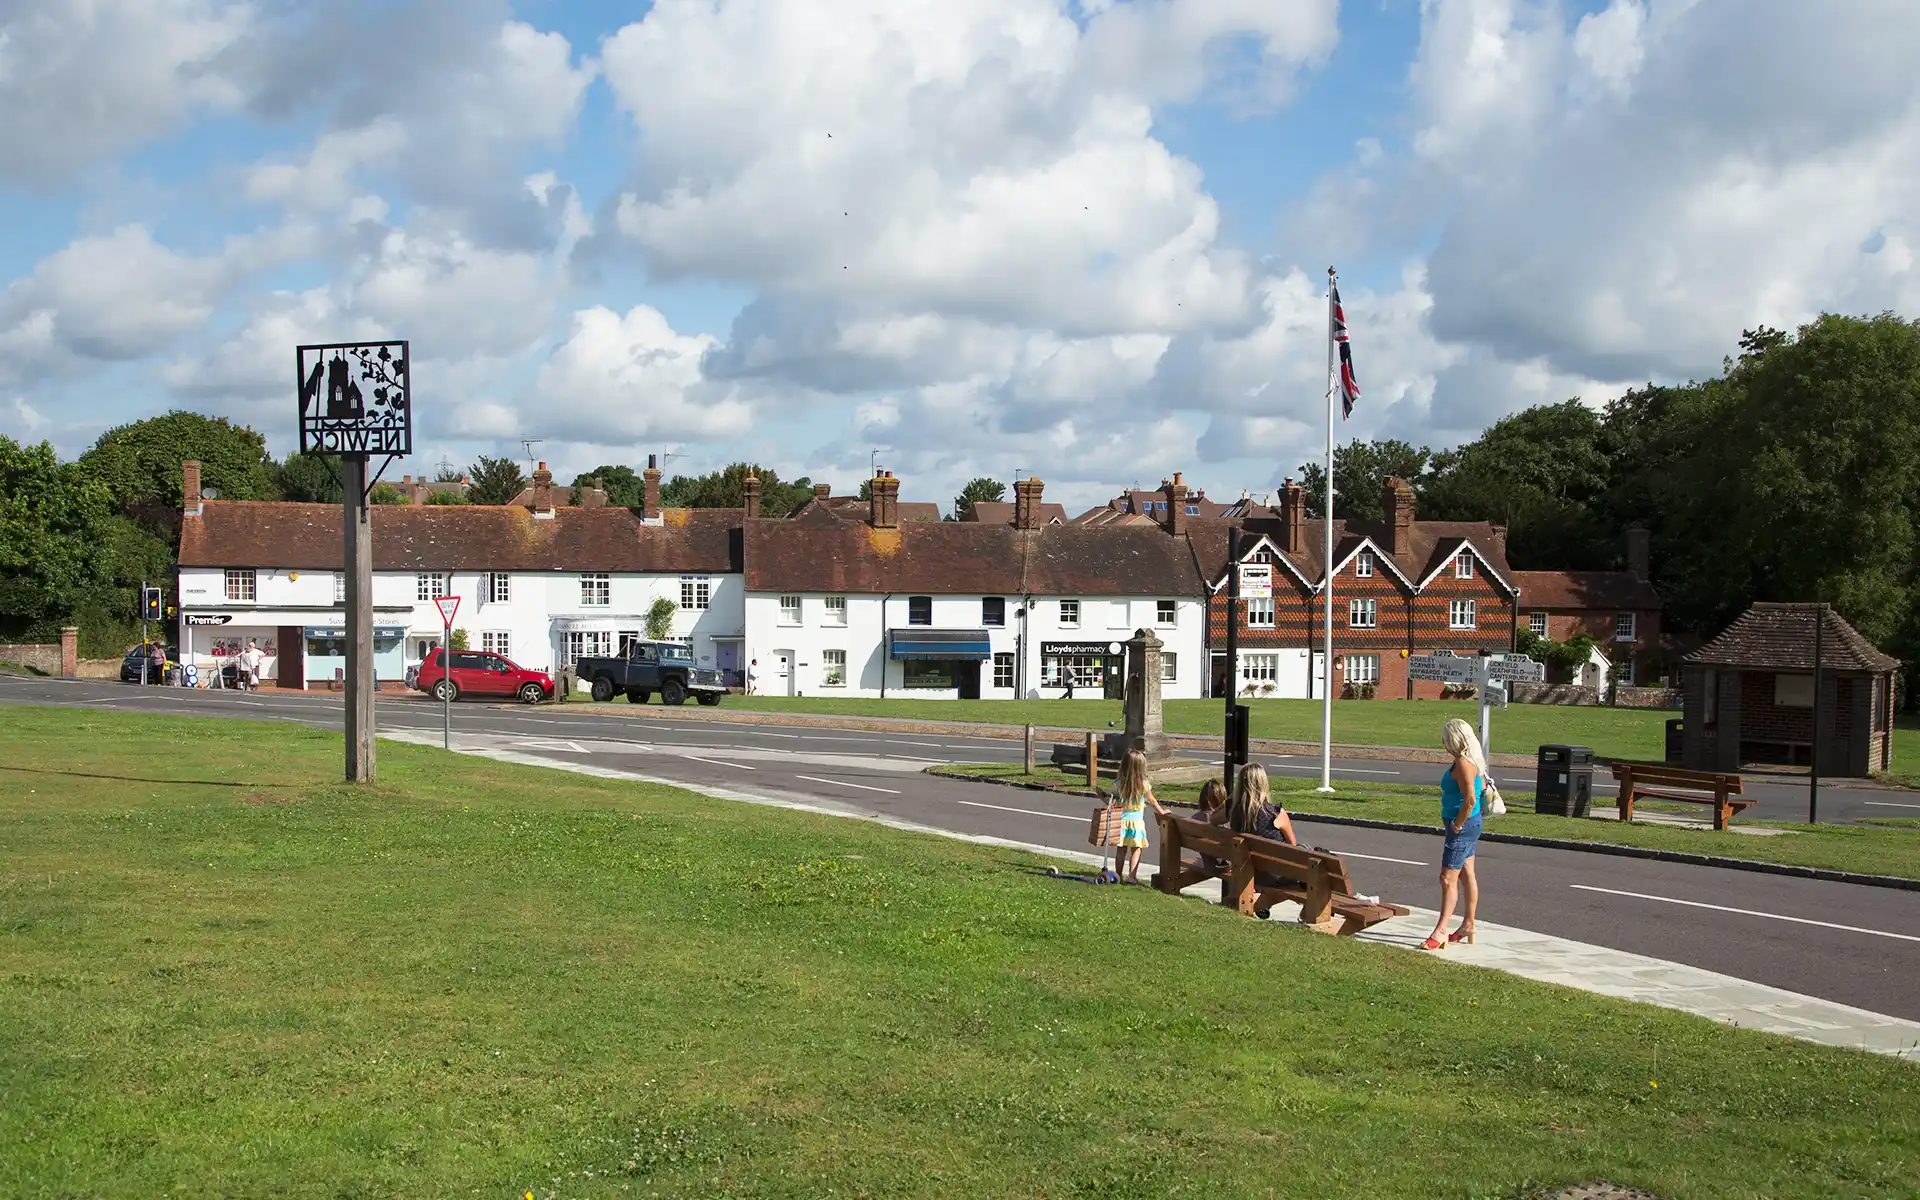 A view of Newick village green, with people sat waiting at the bus stop.